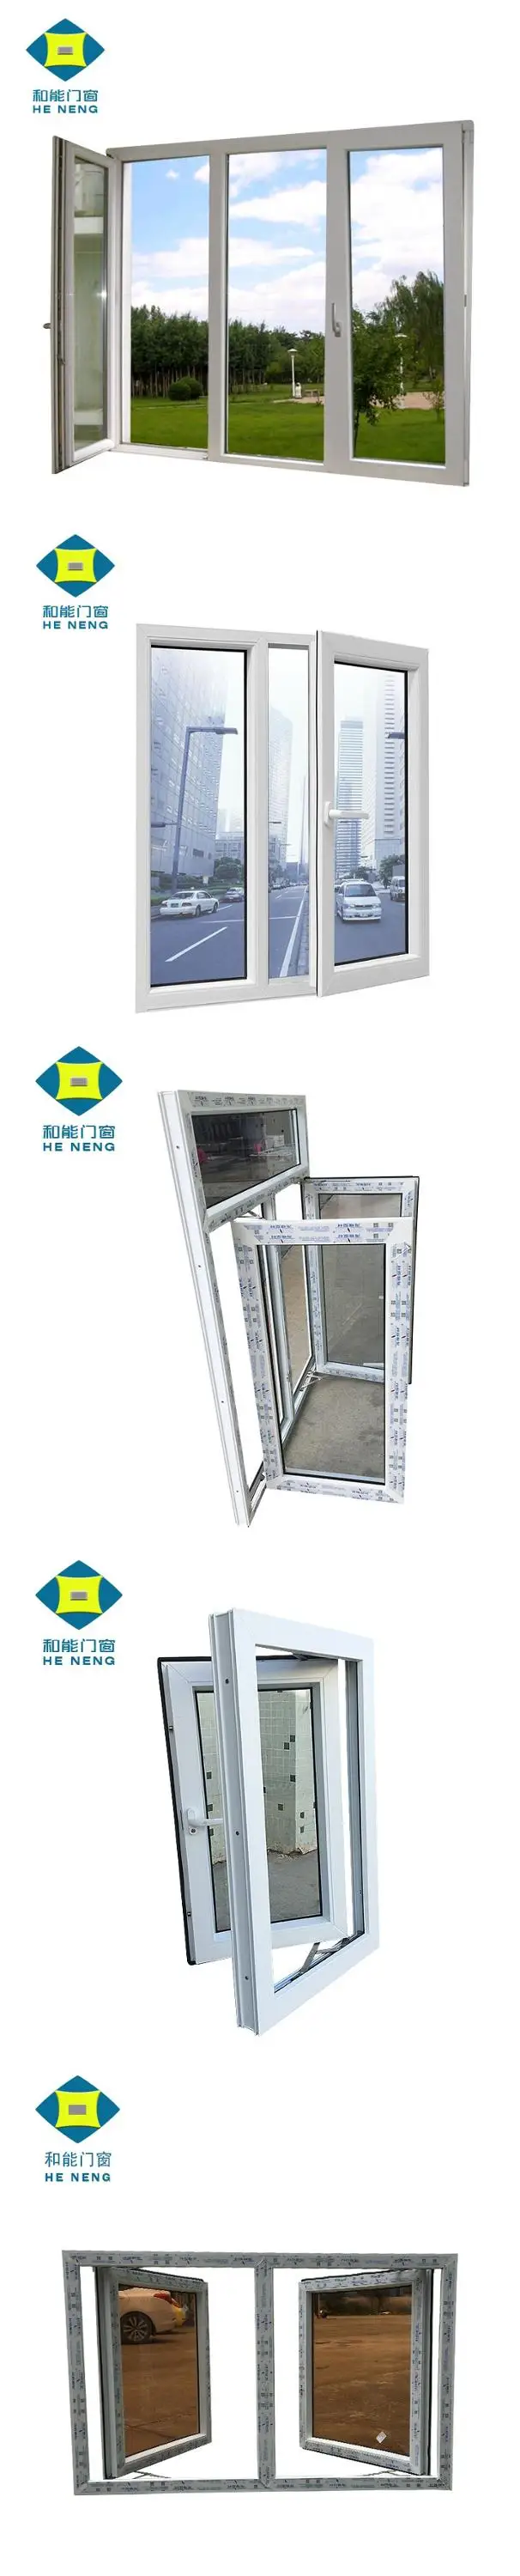 Professional Window and Door Manufacture PVC/UPVC Window Frames Used